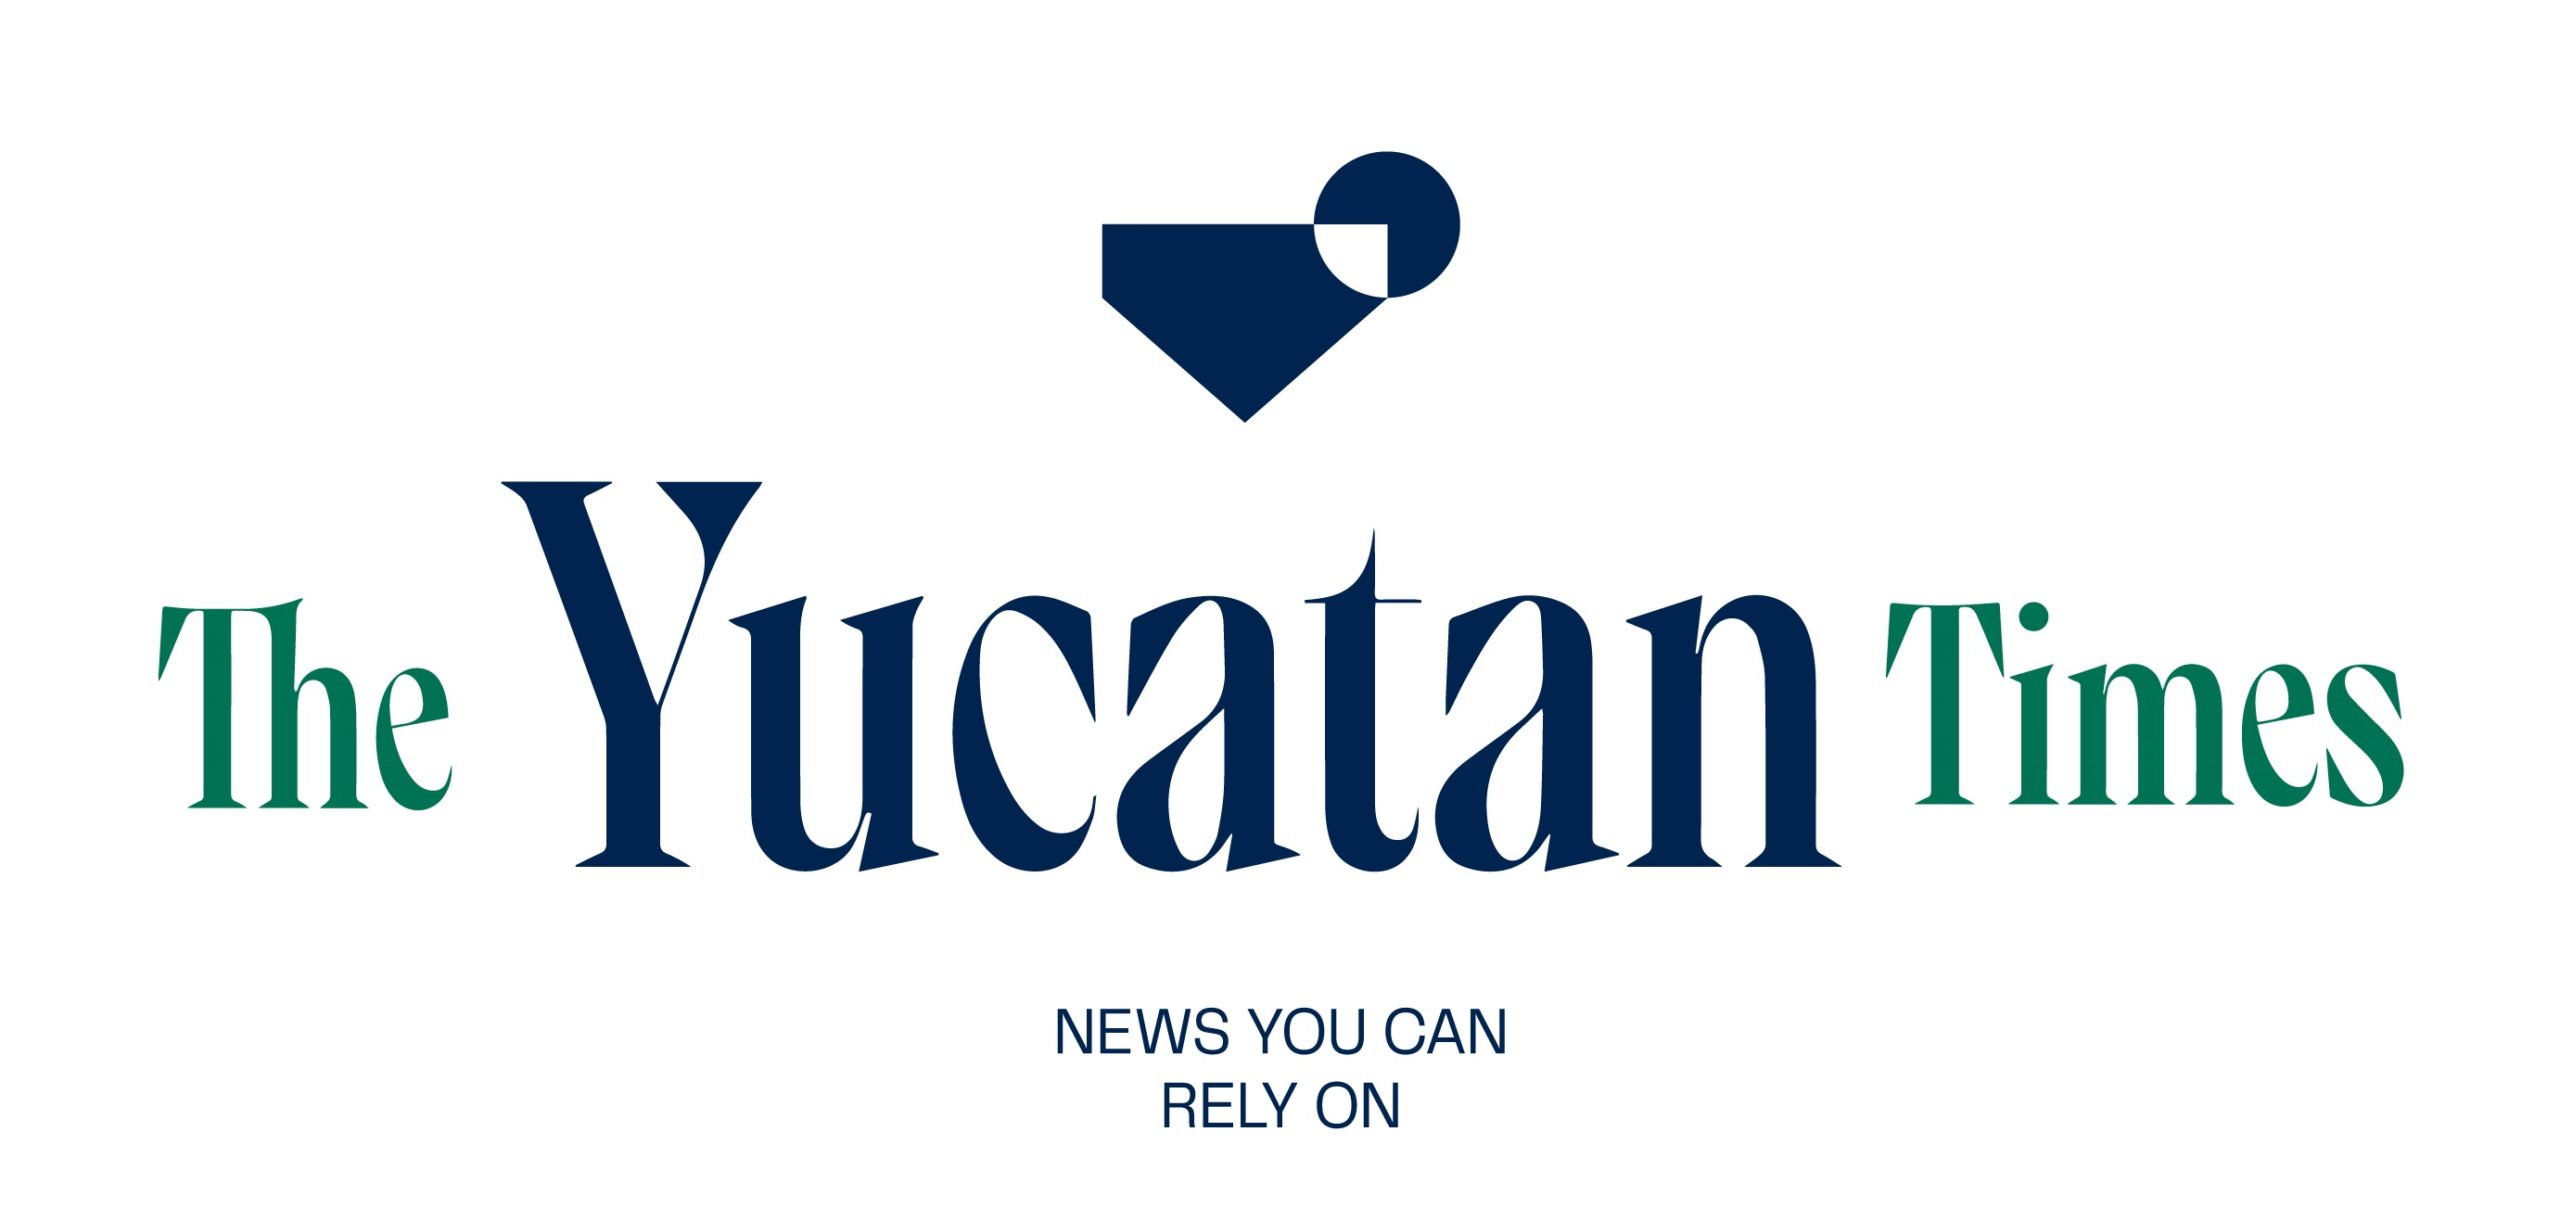 About Us - The Yucatan Times